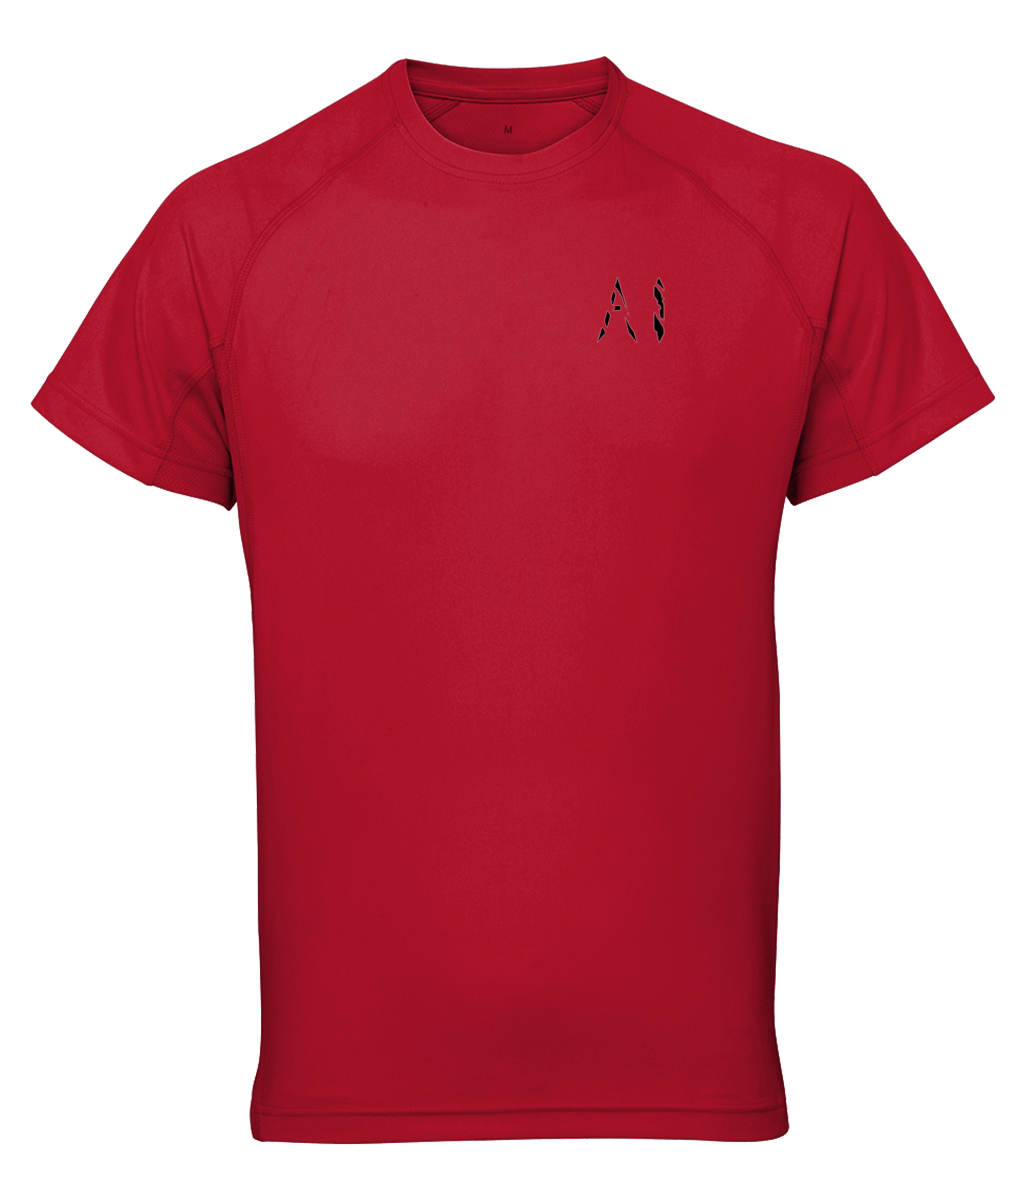 Mens red Athletic Performance Top with black AI logo on the left chest